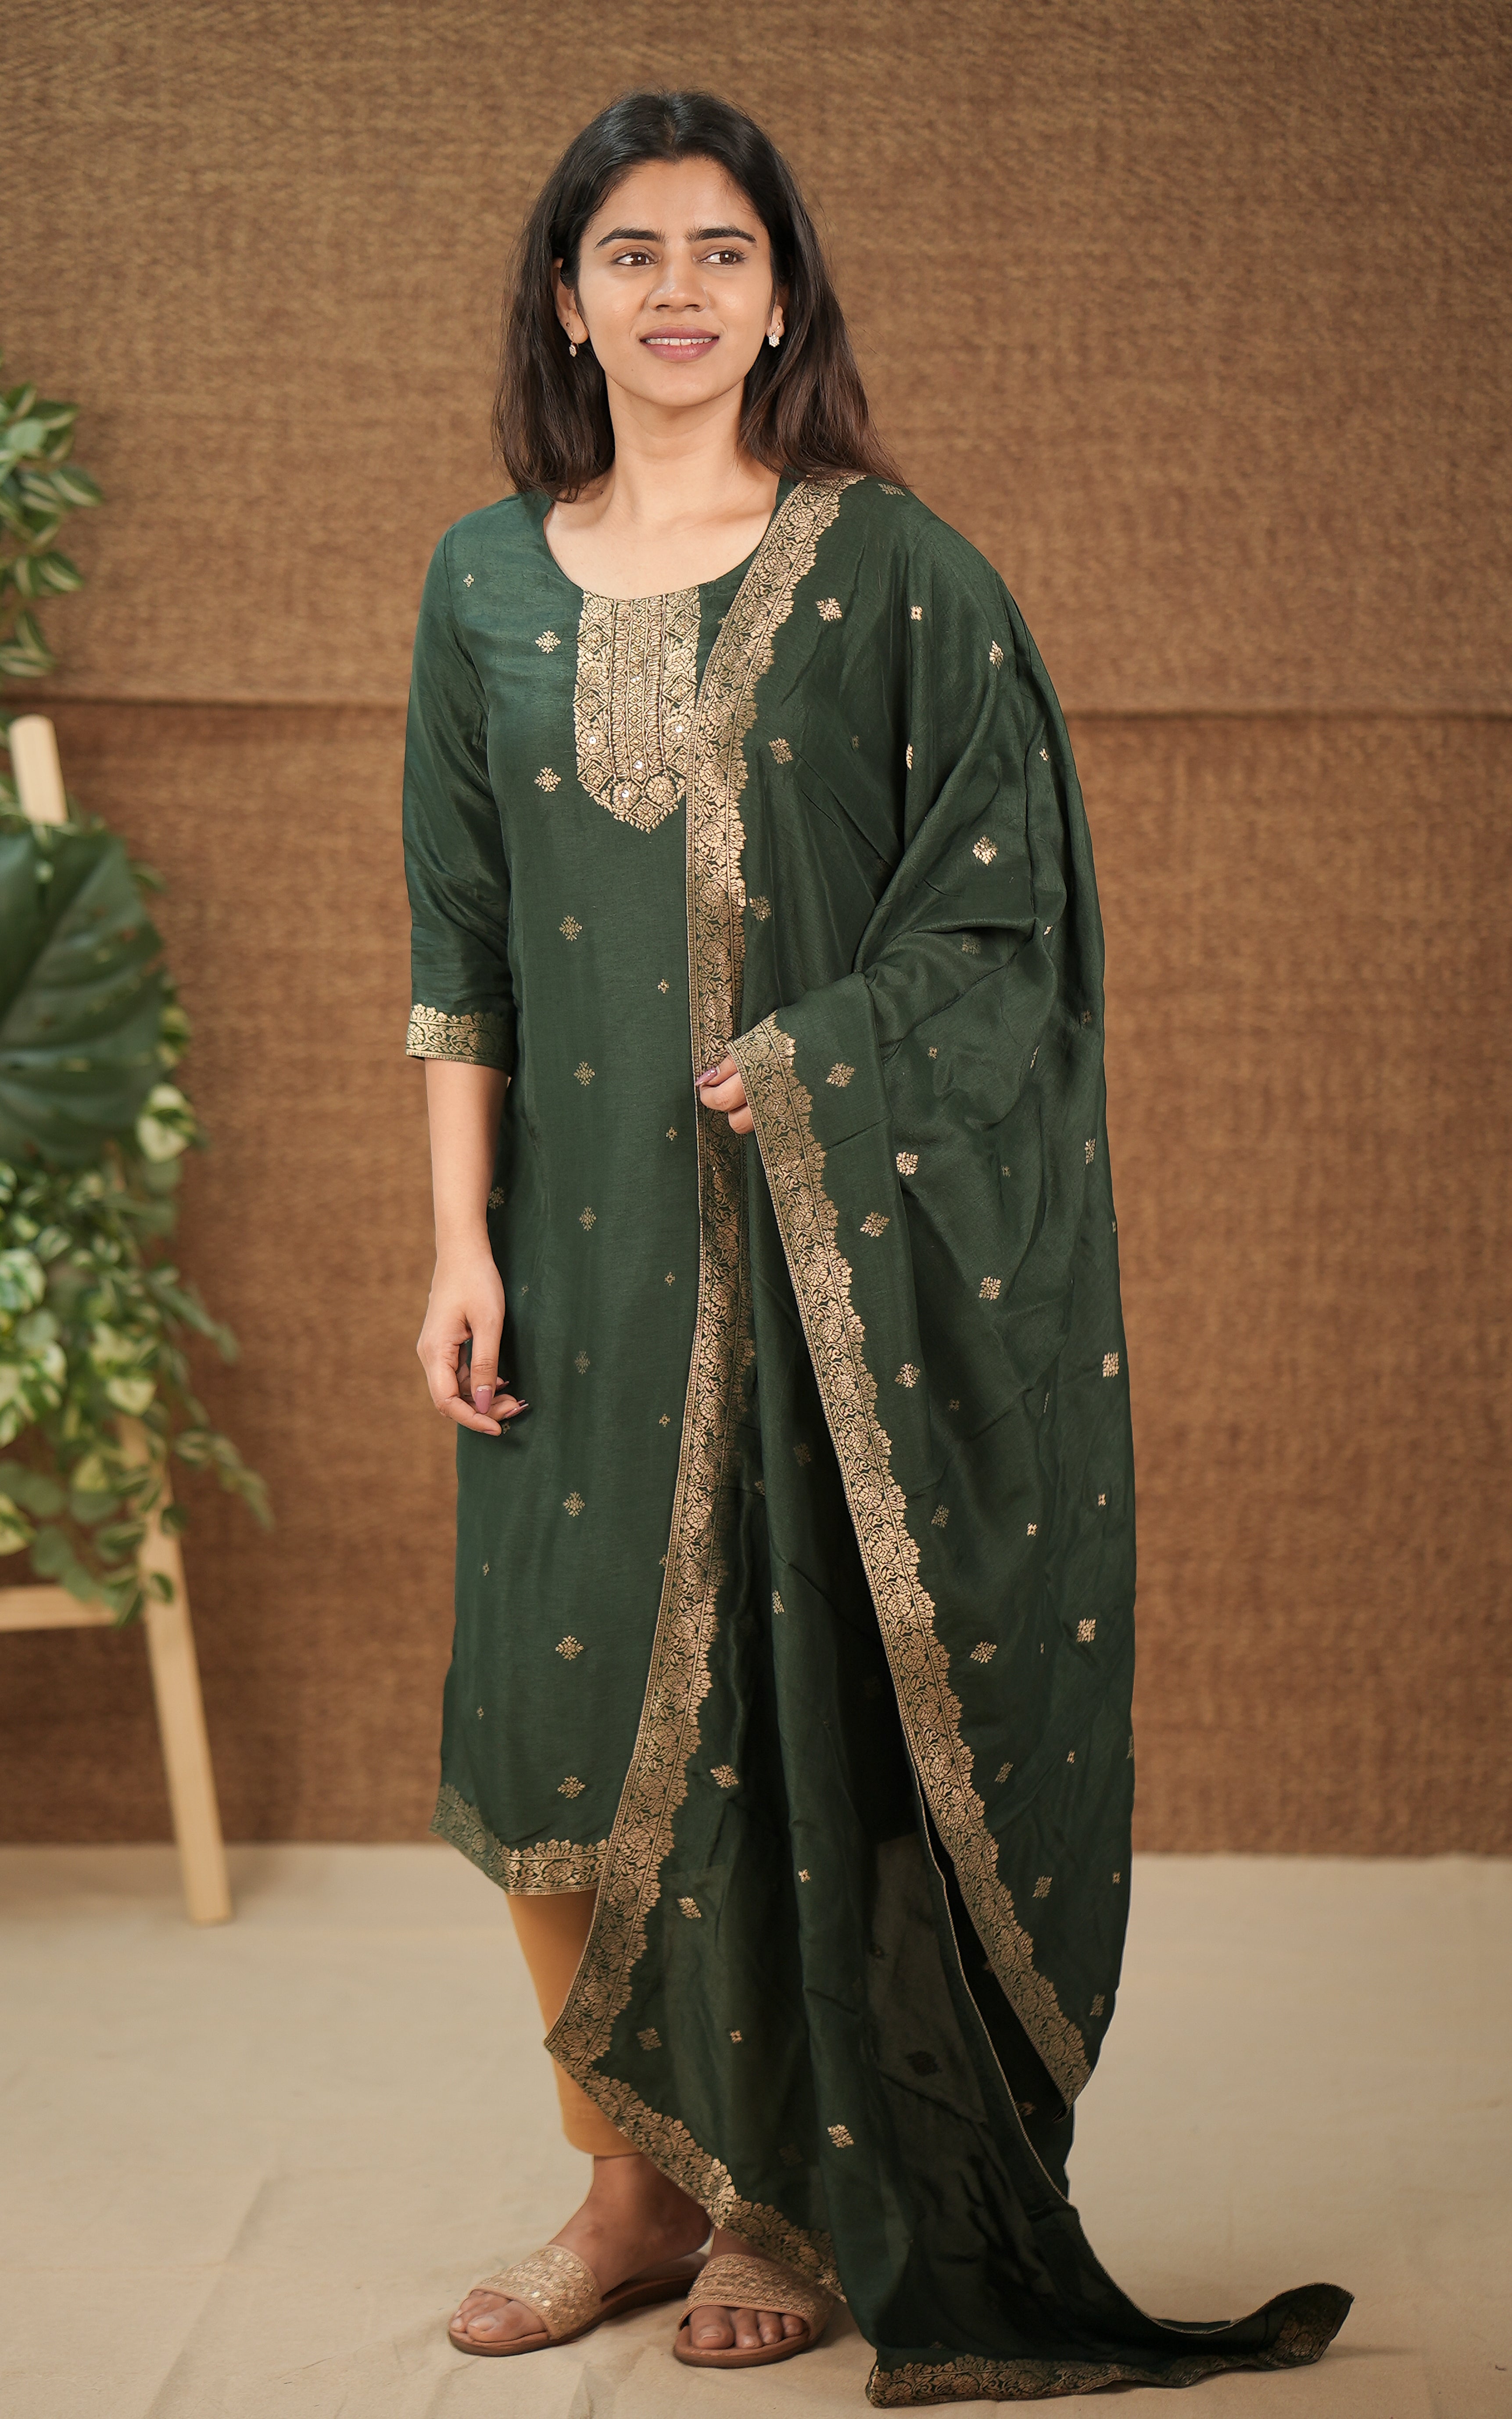 in store bottle green kurti gold embroidery office wear | college wear | special occasion | 3/4th sleeve kurti 